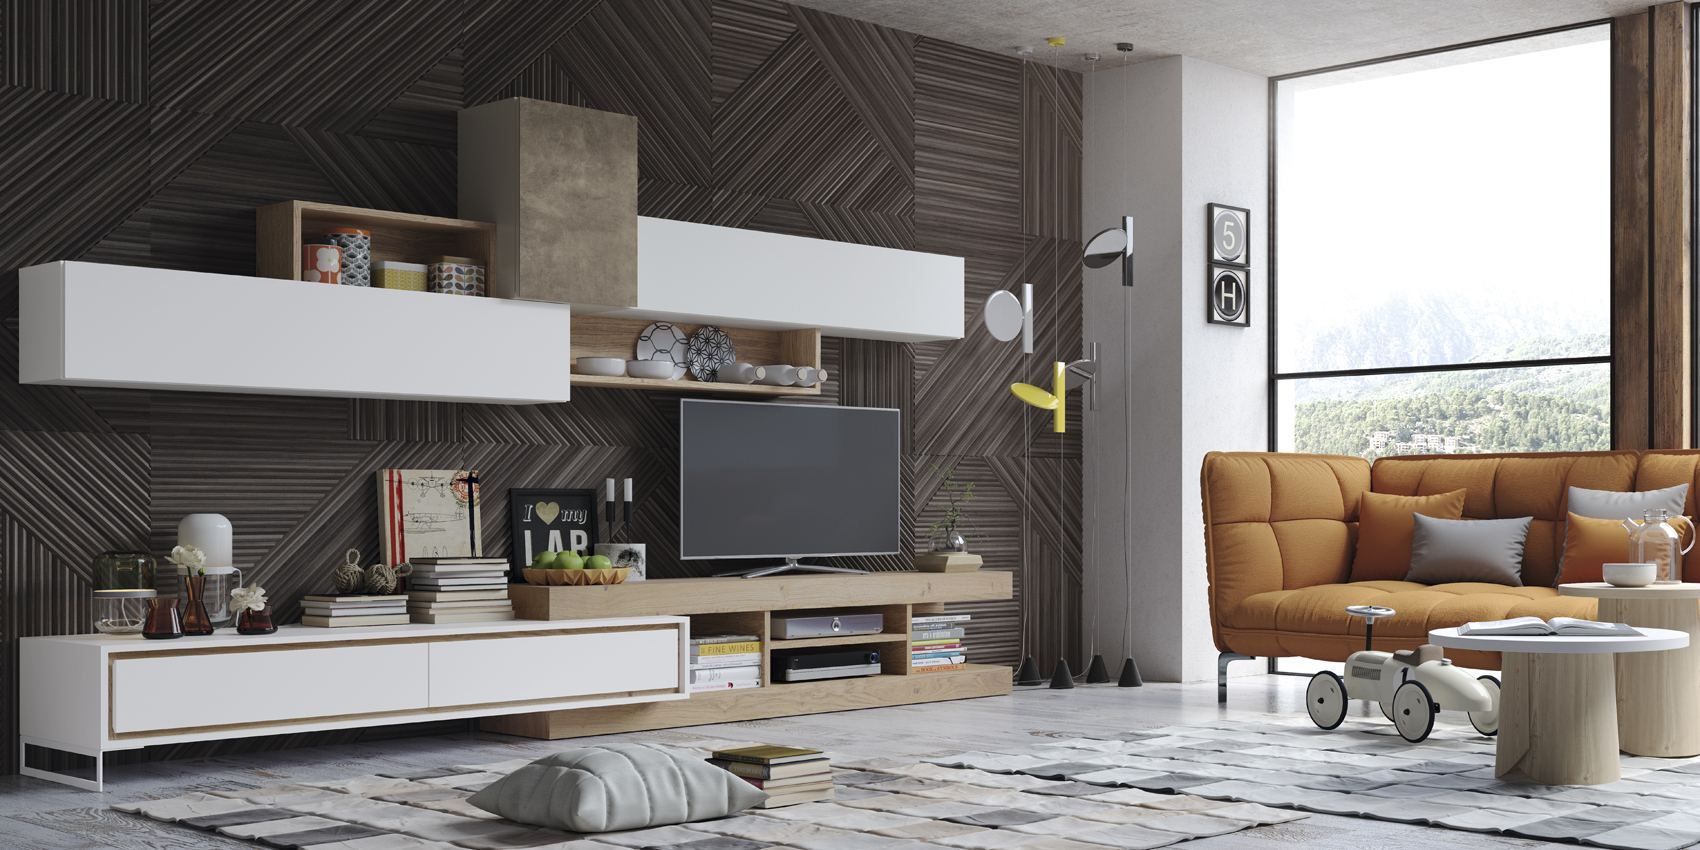 Brands MSC Modern Wall Unit, Italy Composition L2